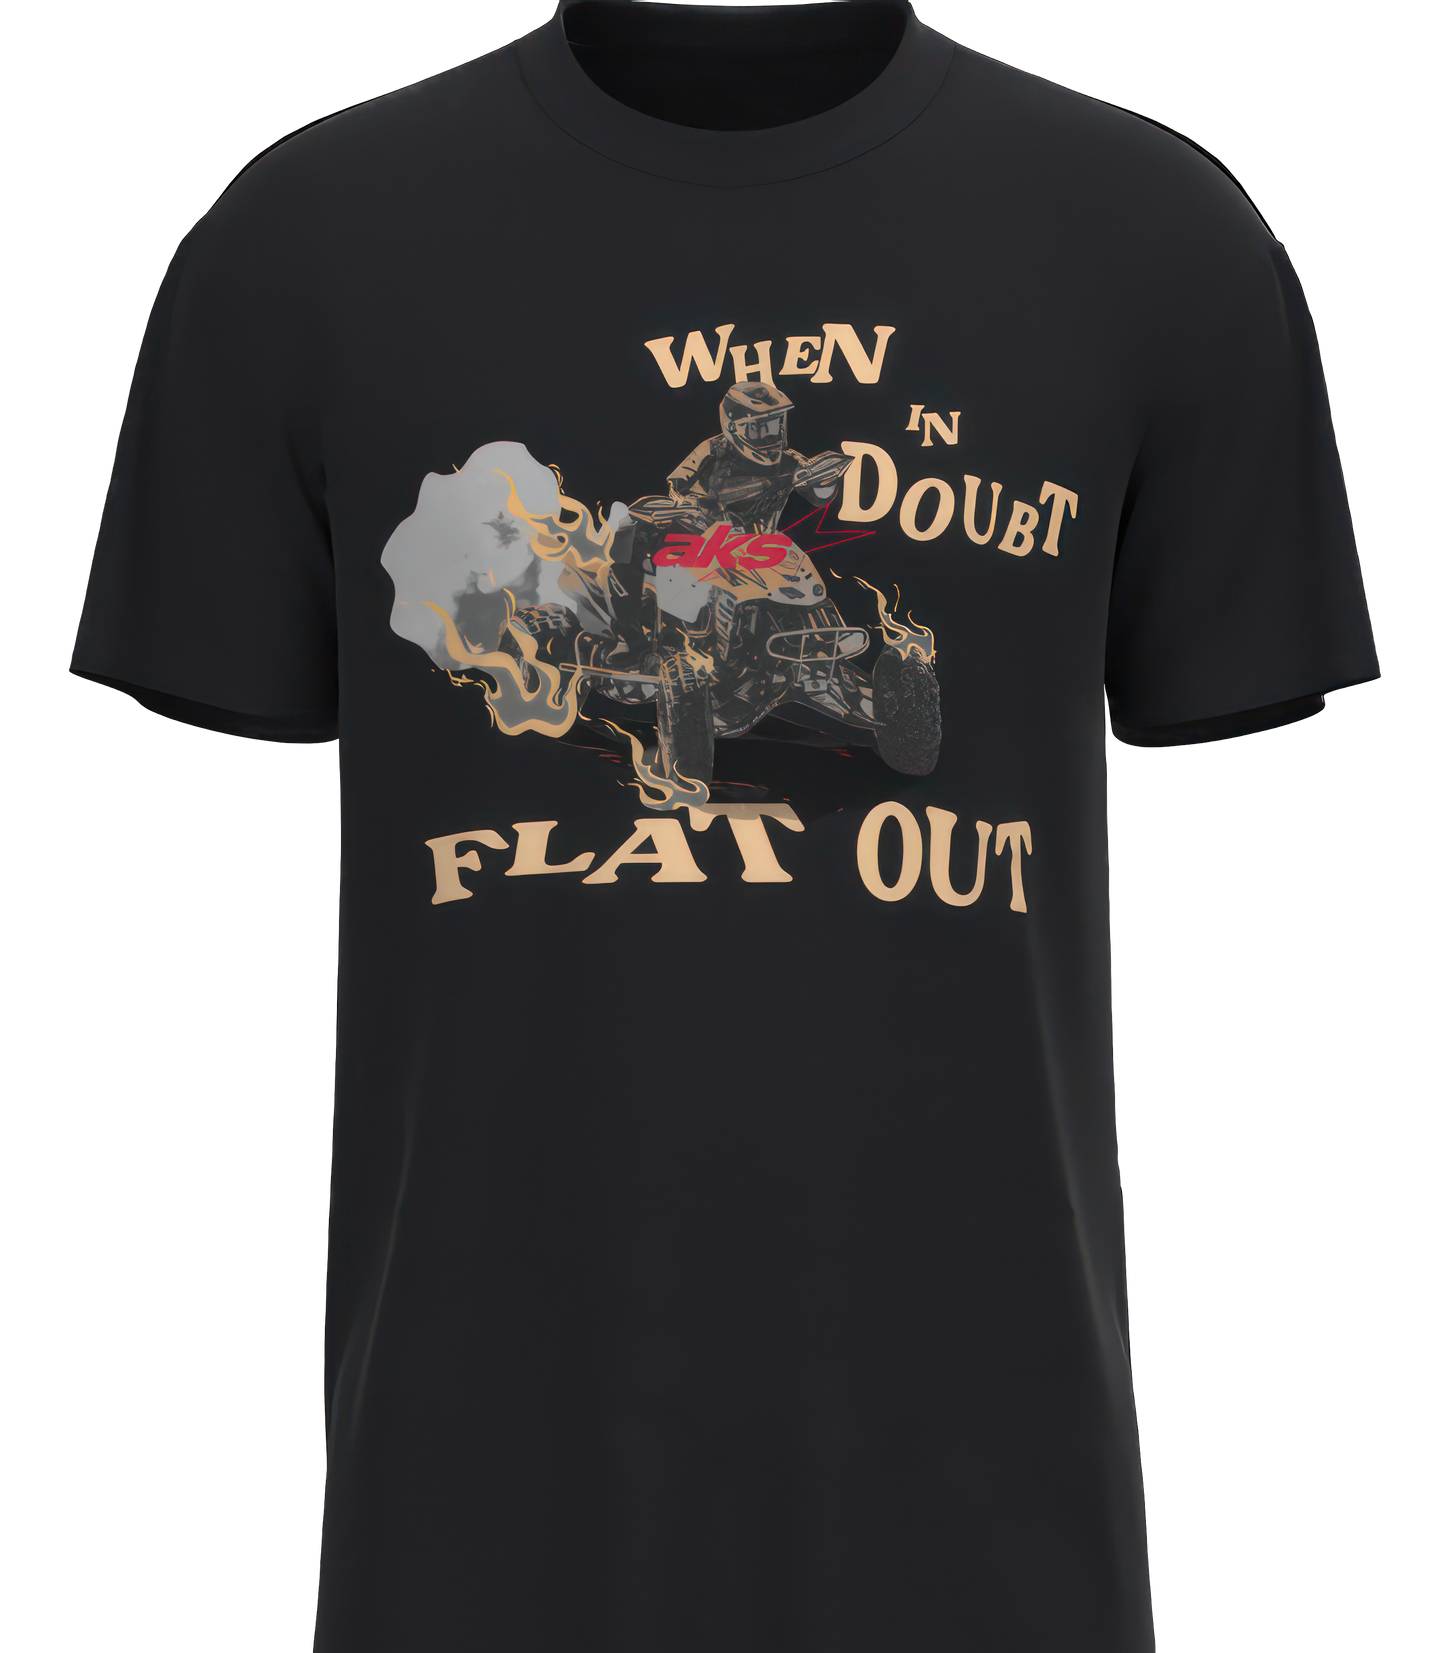 When in Doubt, Flat Out T-shirt (Black)